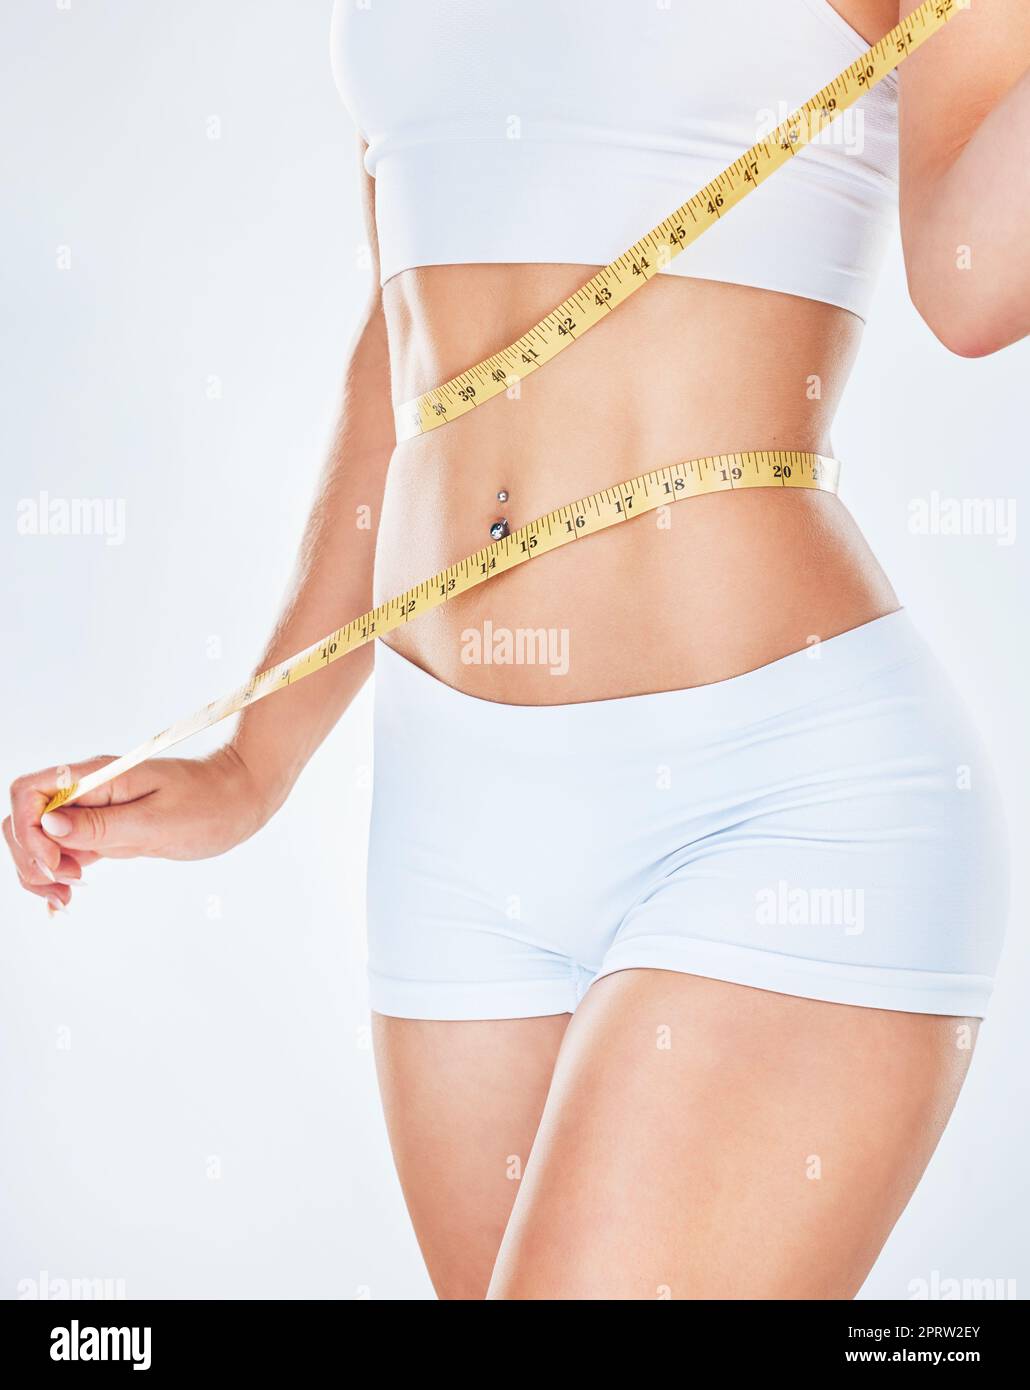 https://c8.alamy.com/comp/2PRW2EY/body-tape-measure-and-diet-with-a-woman-measuring-her-waist-to-track-weightloss-in-studio-on-a-gray-background-fitness-health-and-wellness-with-a-y-2PRW2EY.jpg